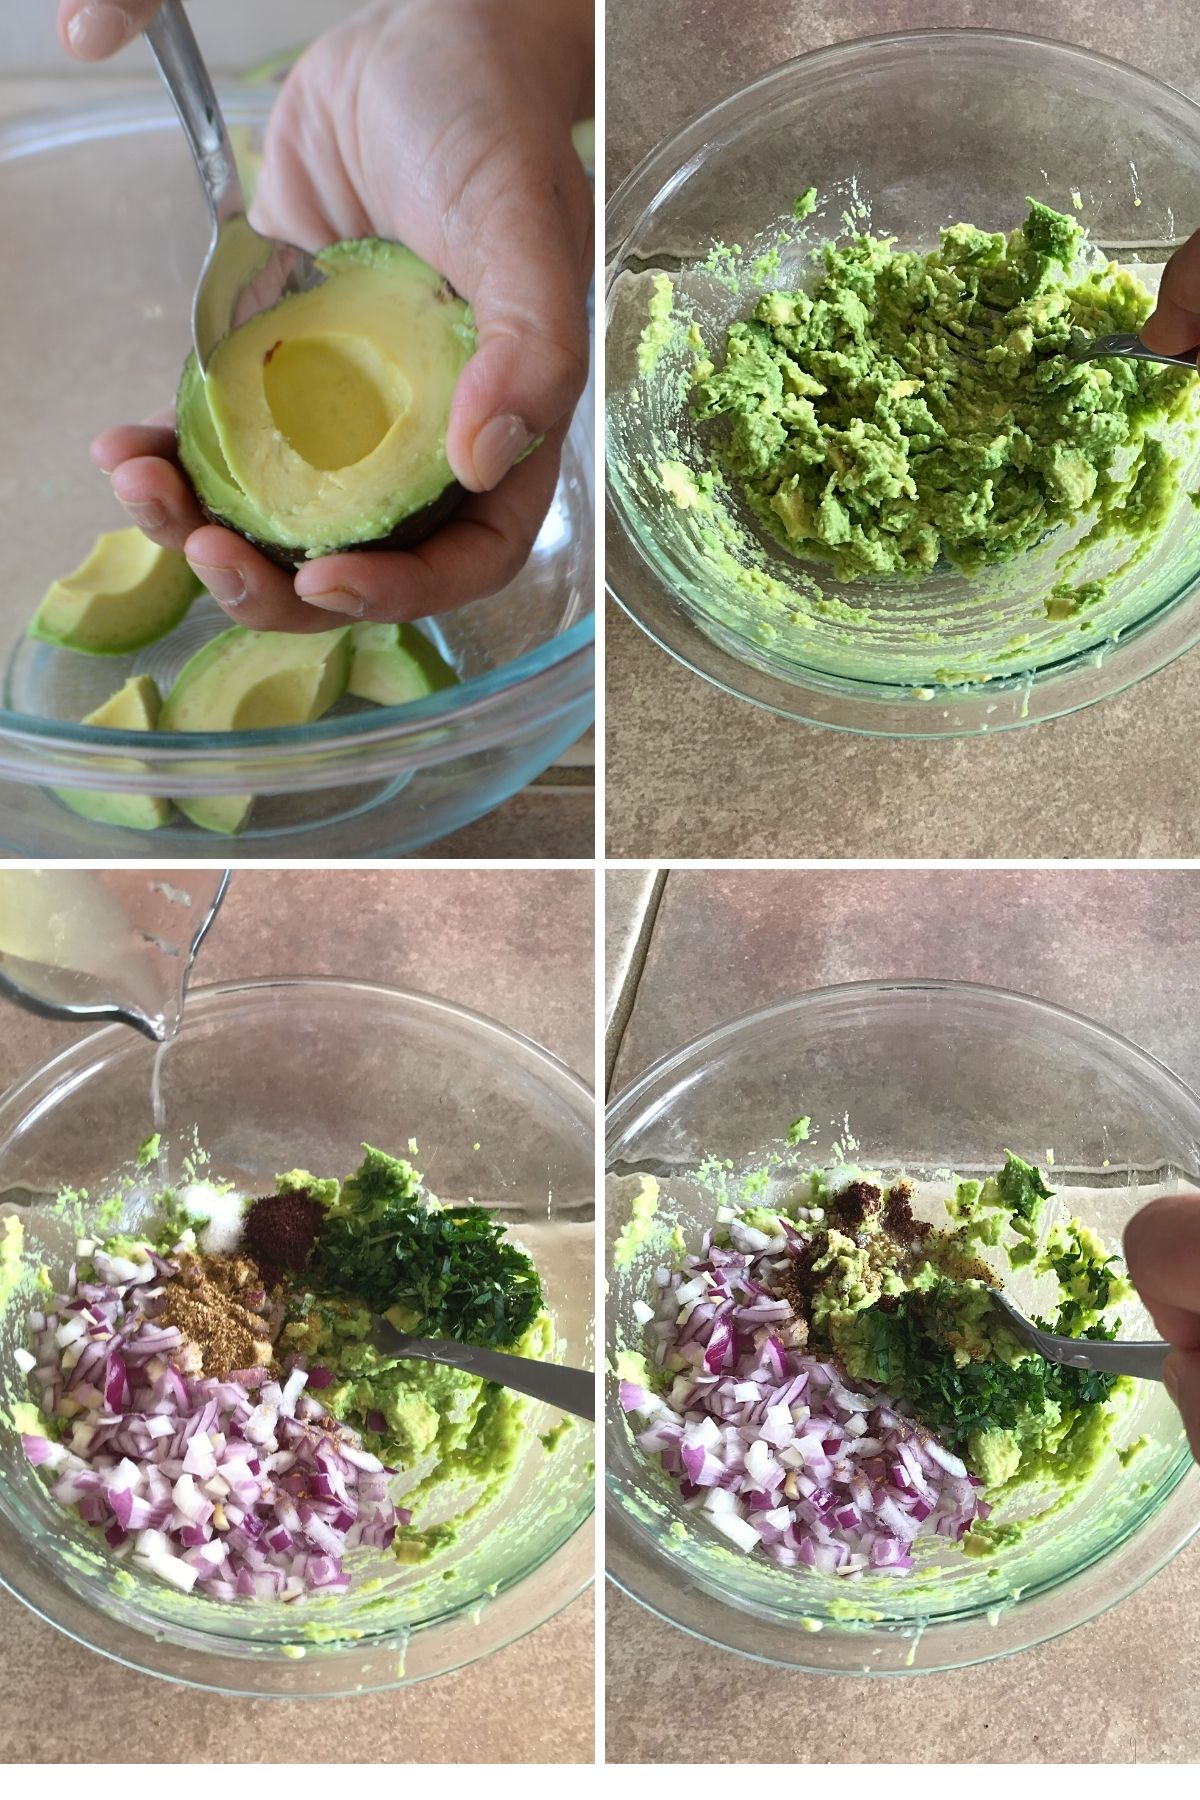 A collage of 4 images showing how to prepare guacamole.